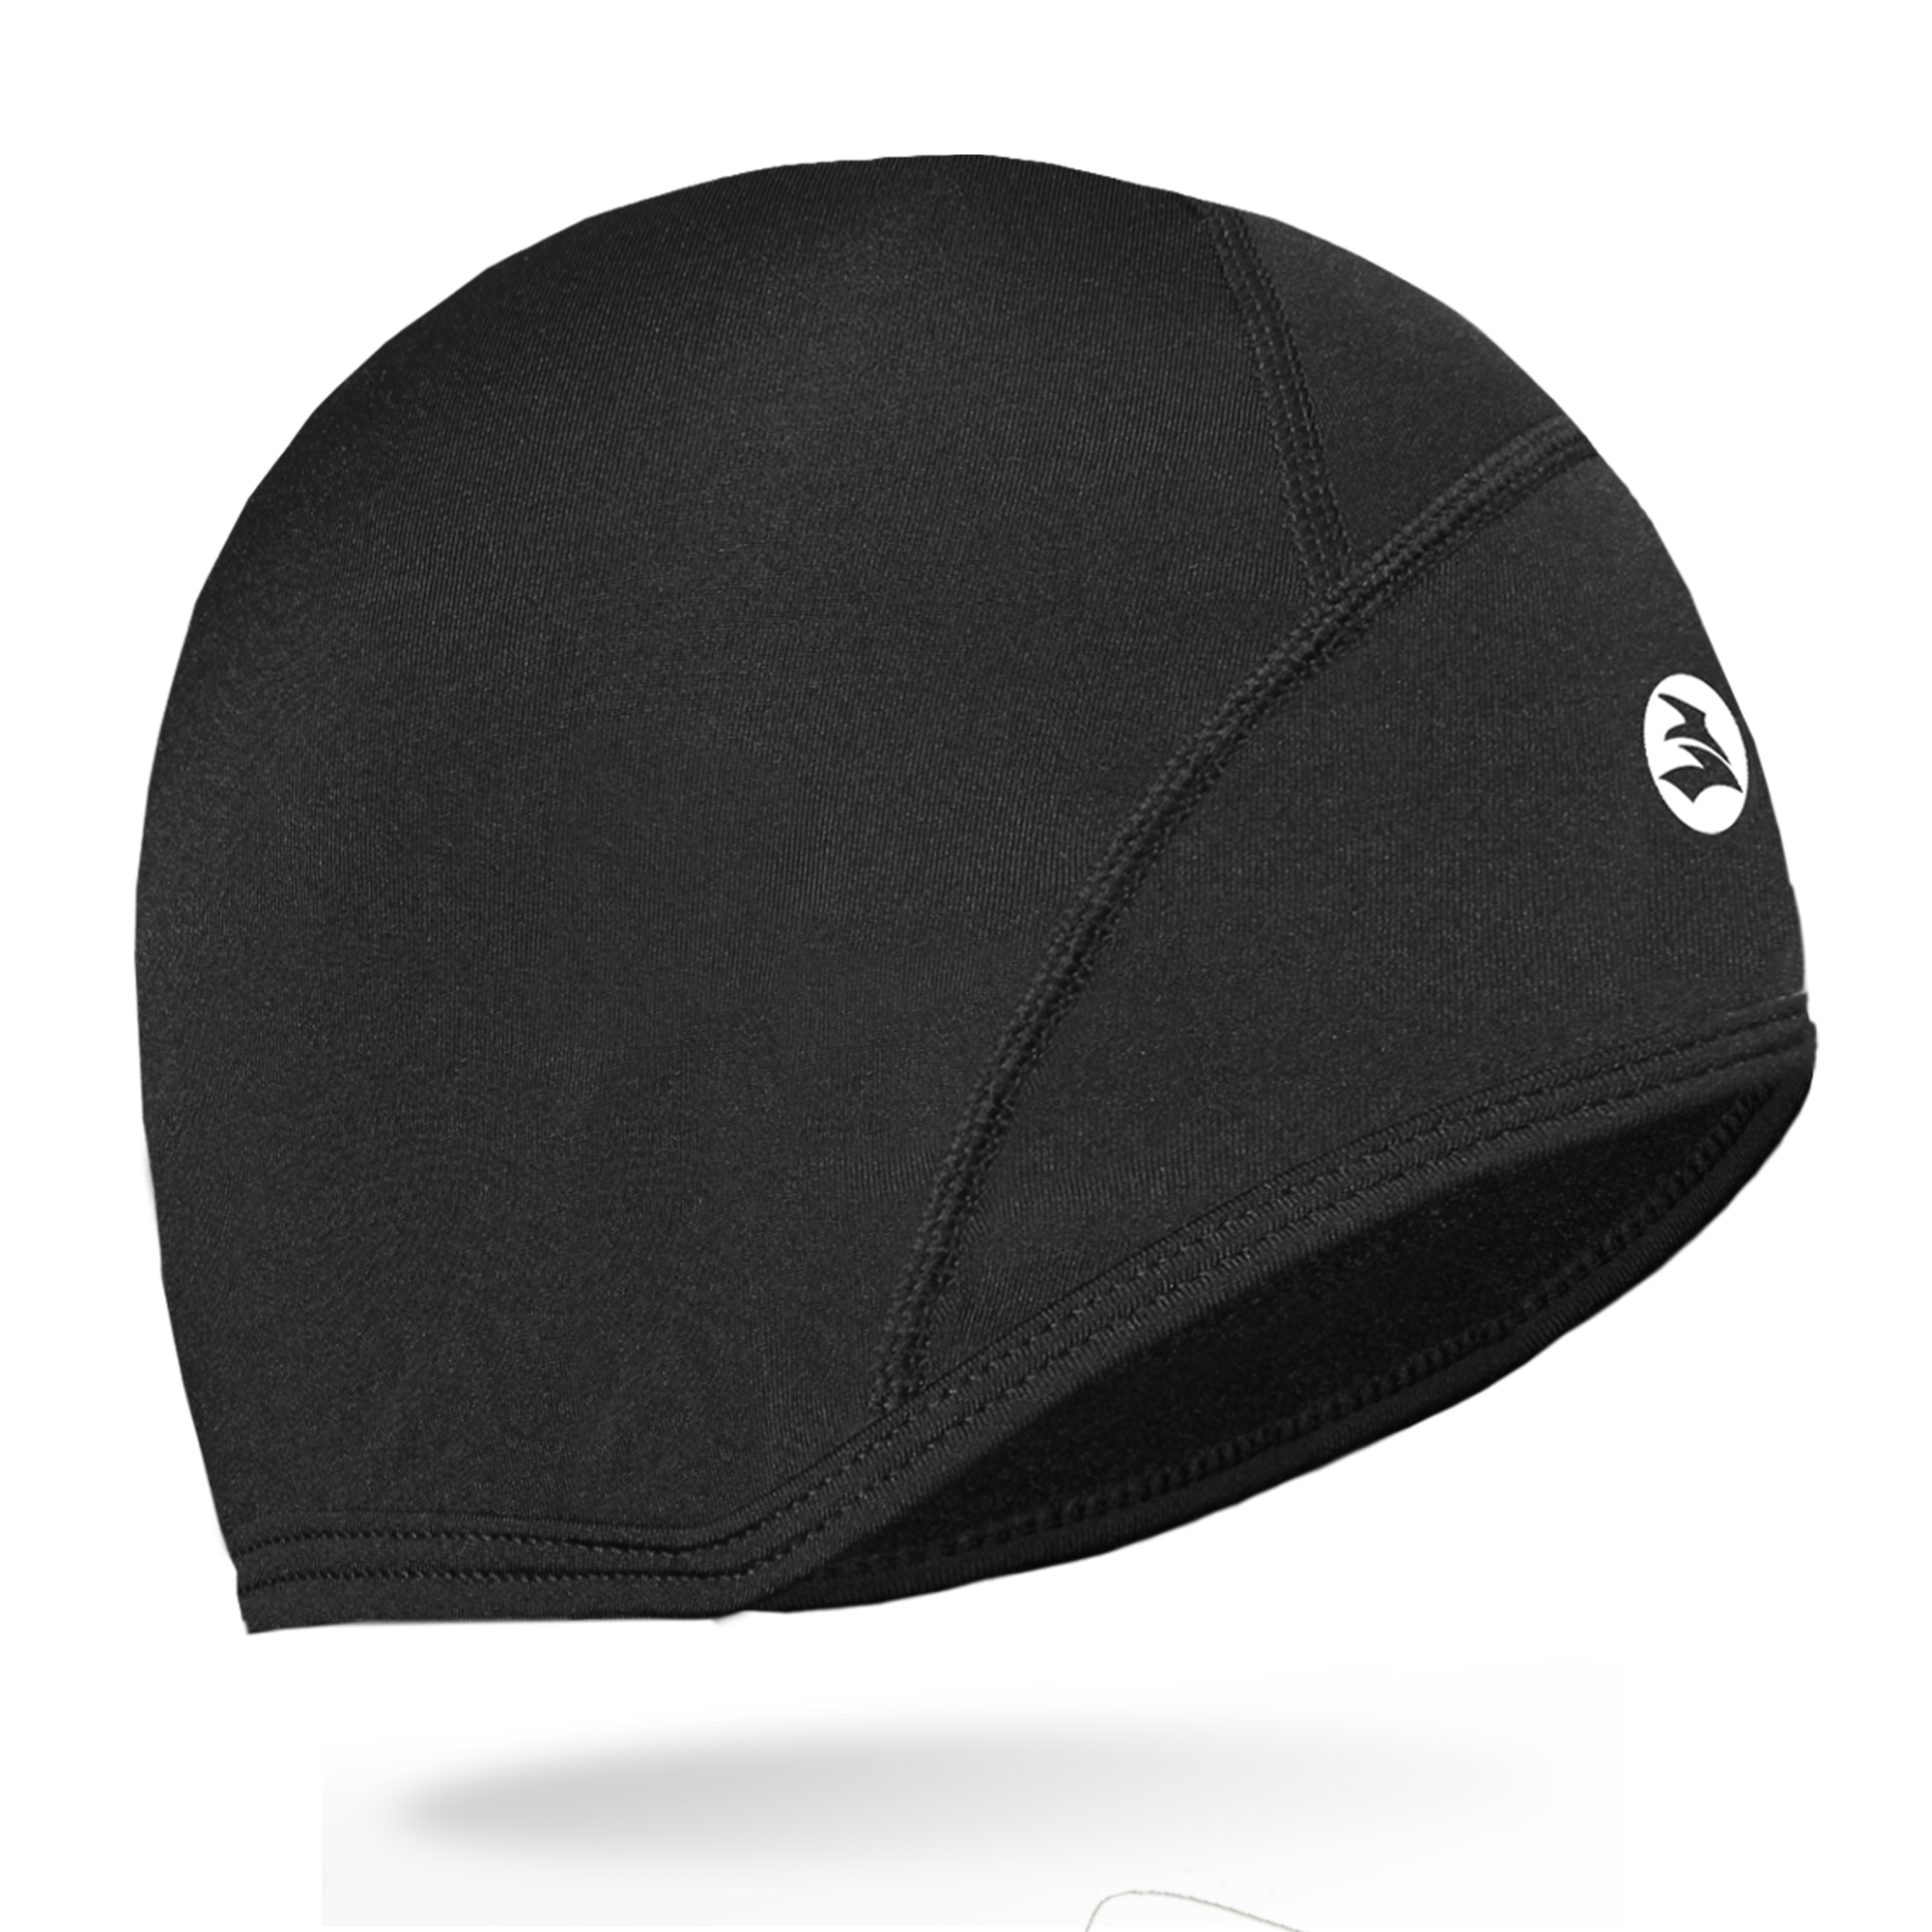 Skull Cap Helmet Liner for Men Women Winter Thermal Cycling Hat with Ear Cover 